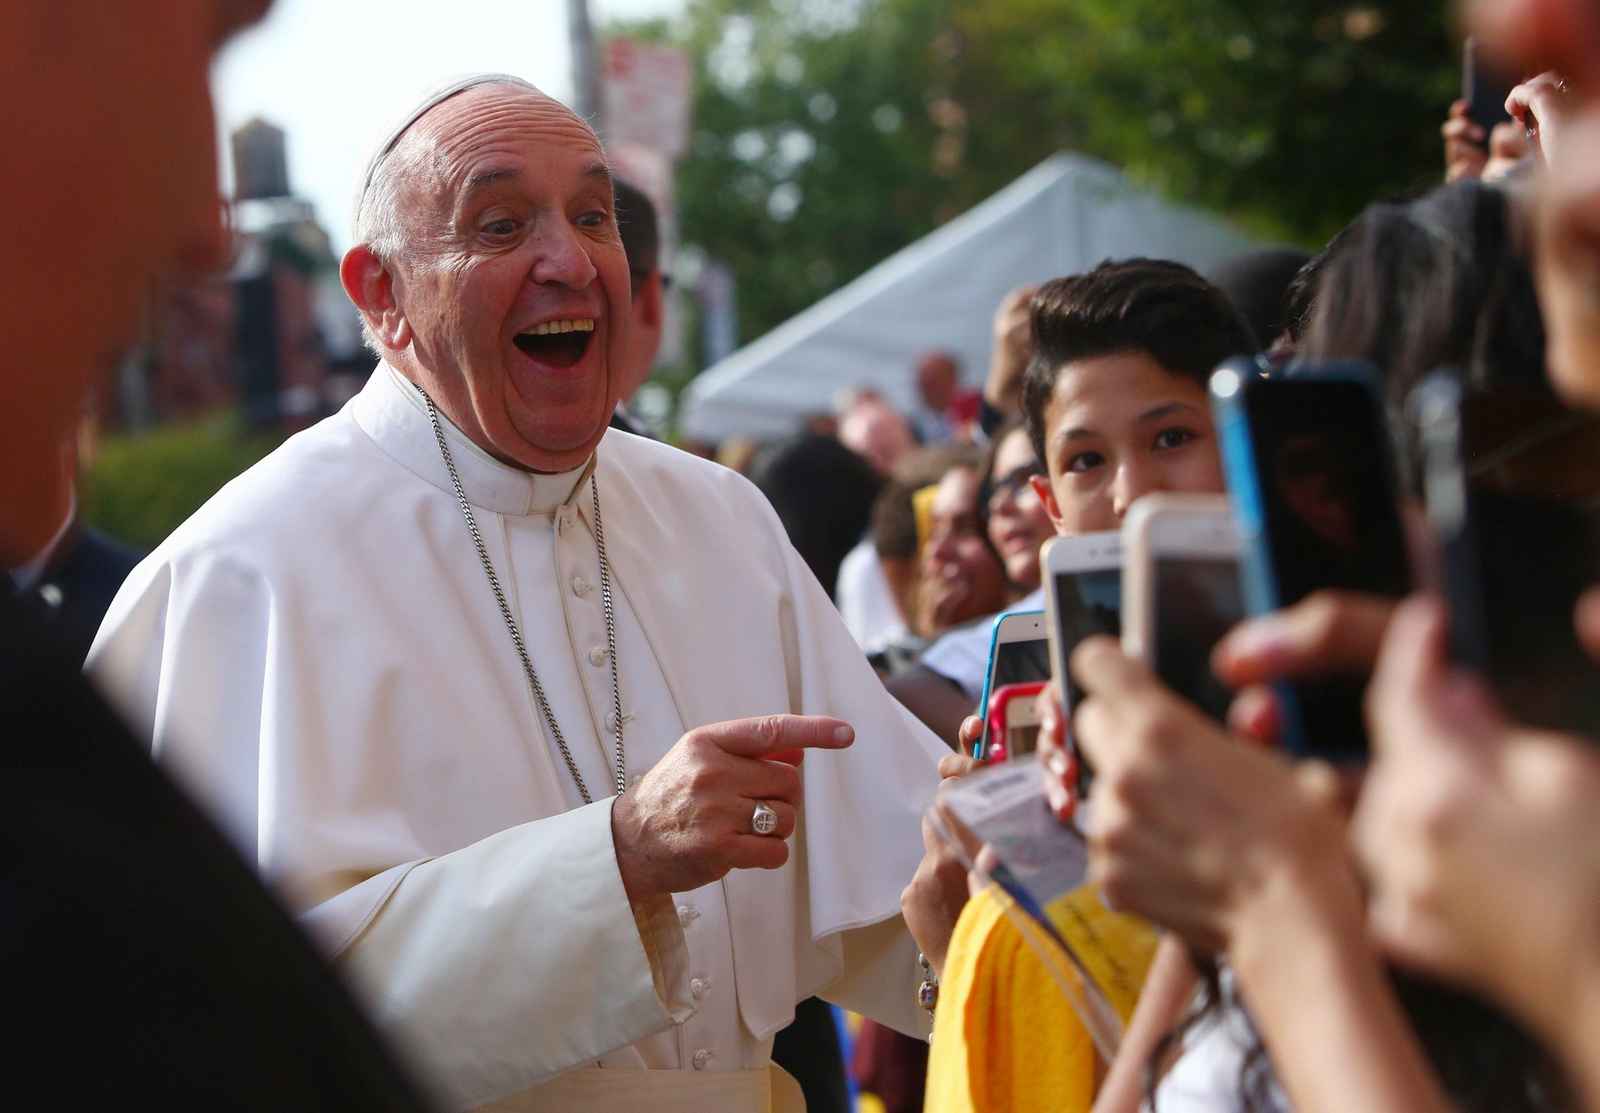 Pope Francis arrives at Our Lady Queen of Angels School in East Harlem, in New York